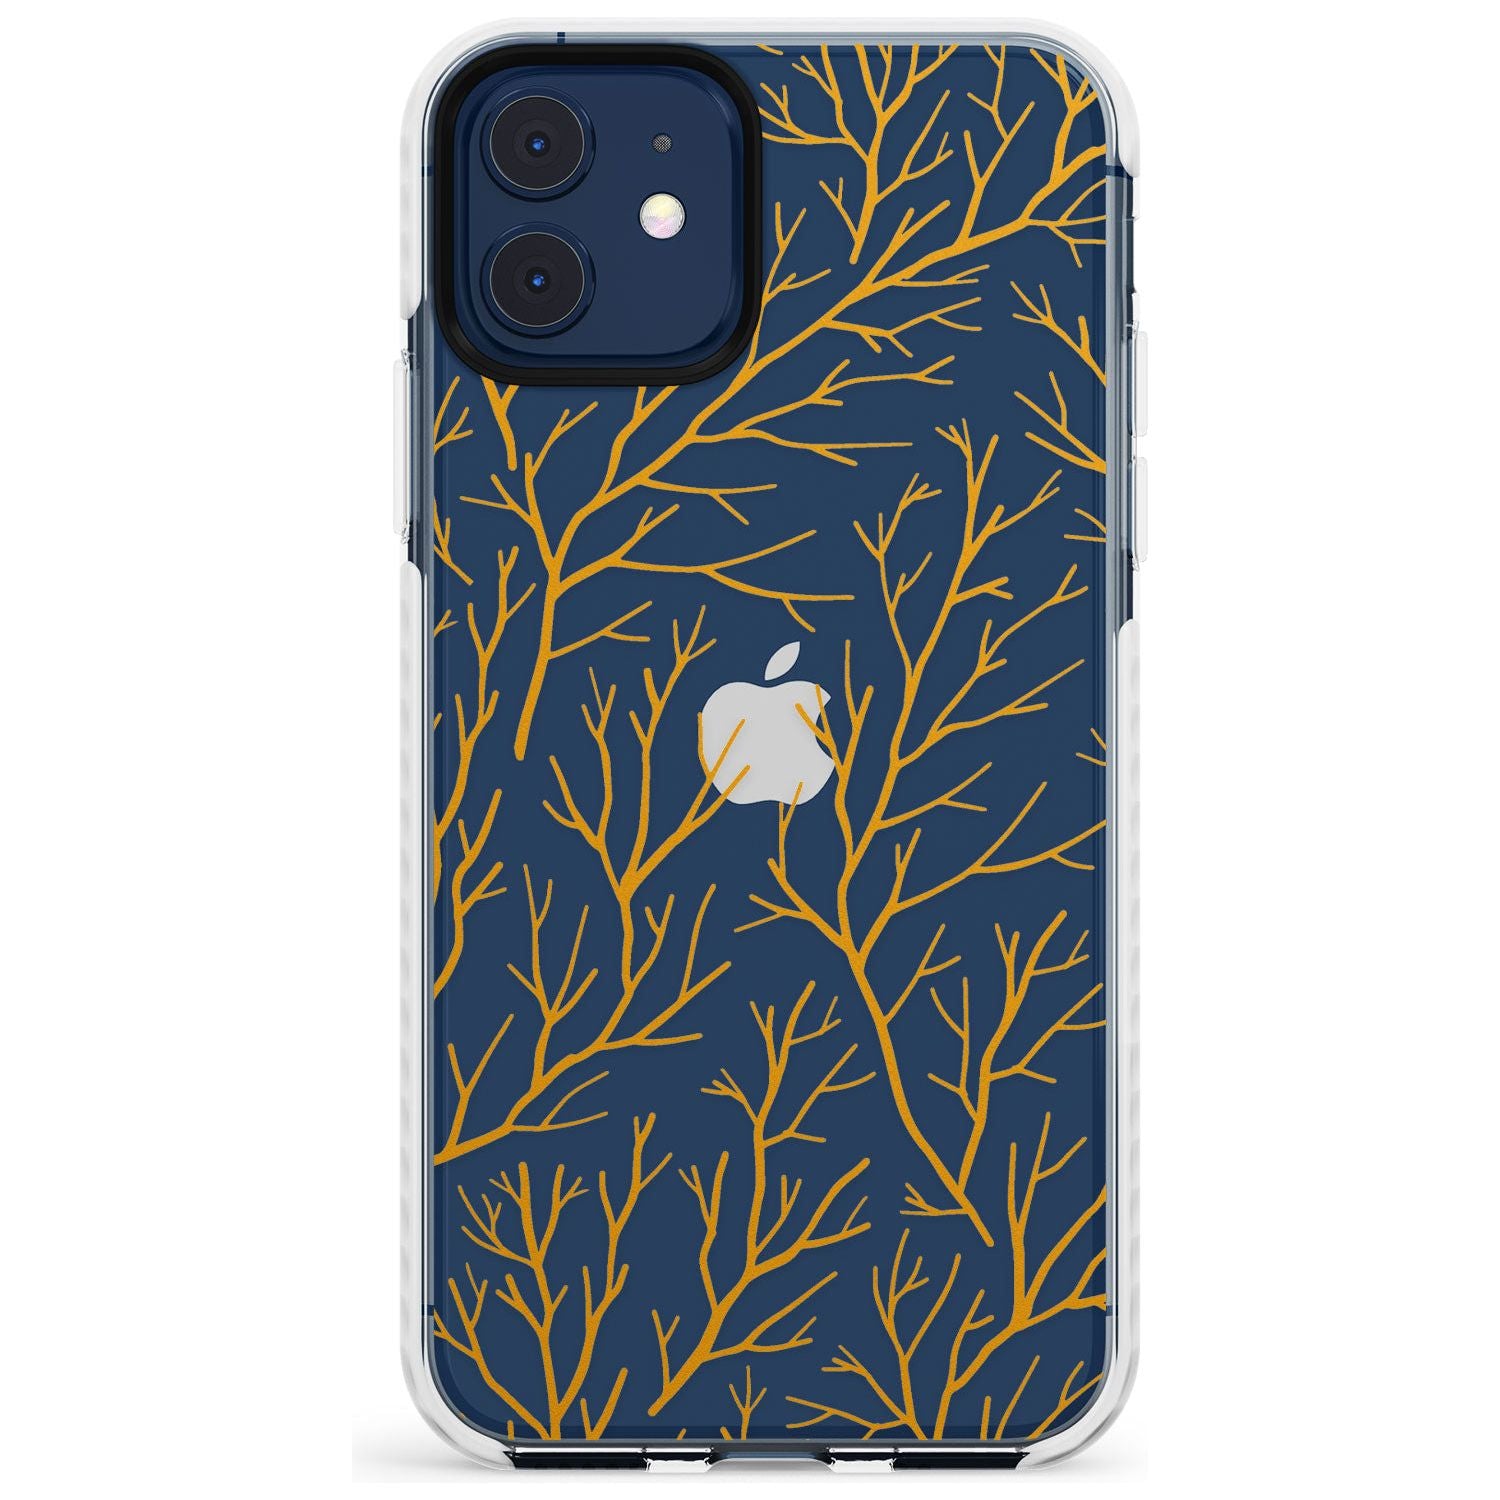 Personalised Bramble Branches Pattern Impact Phone Case for iPhone 11